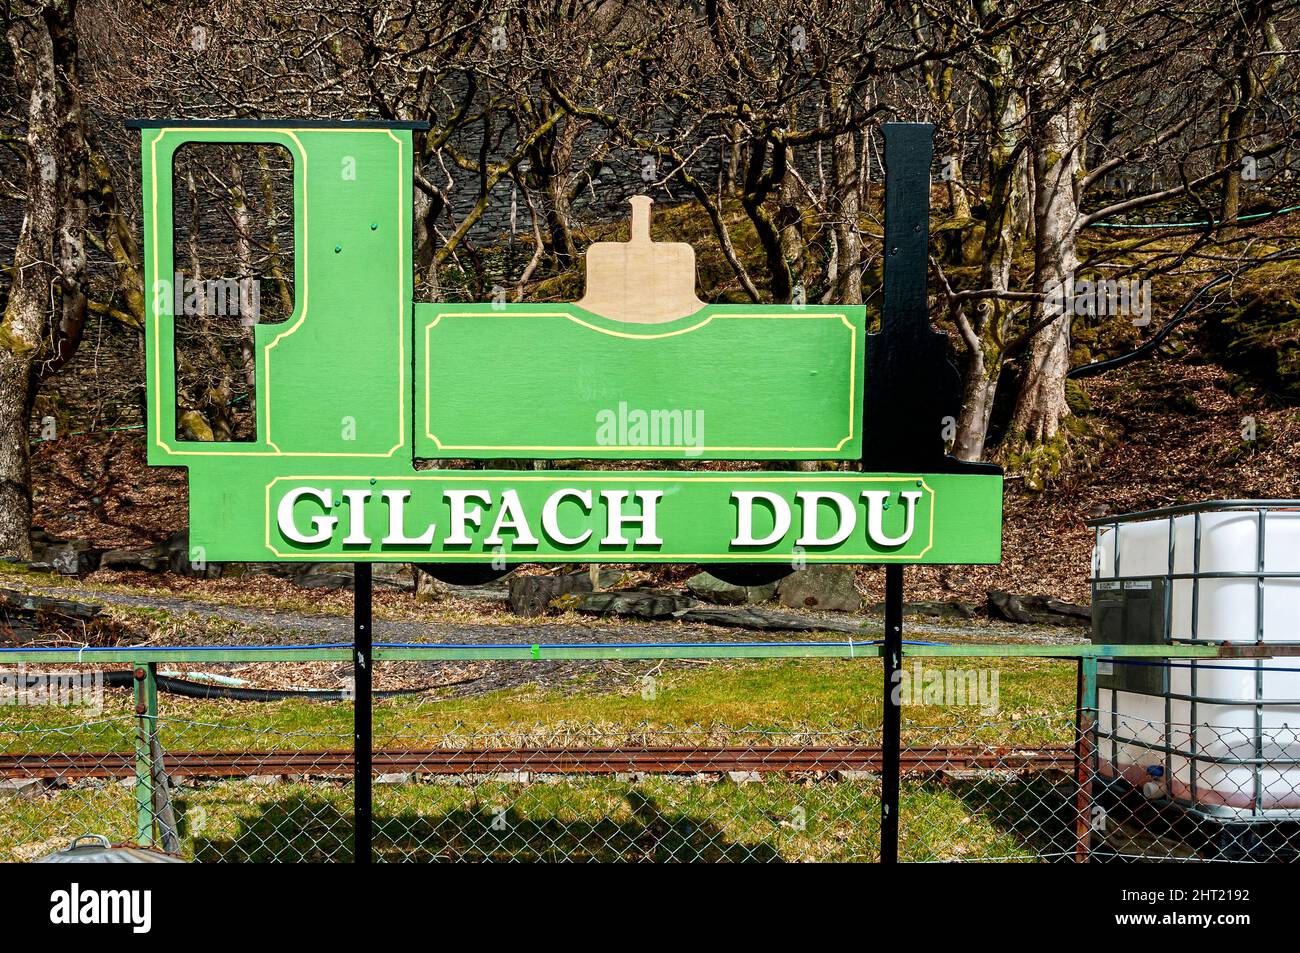 Steel cut into the shape of a narrow gauge locomotive and painted with its colours declares the station Gilfach DDU, on the Llanberis Lake Railway Stock Photo